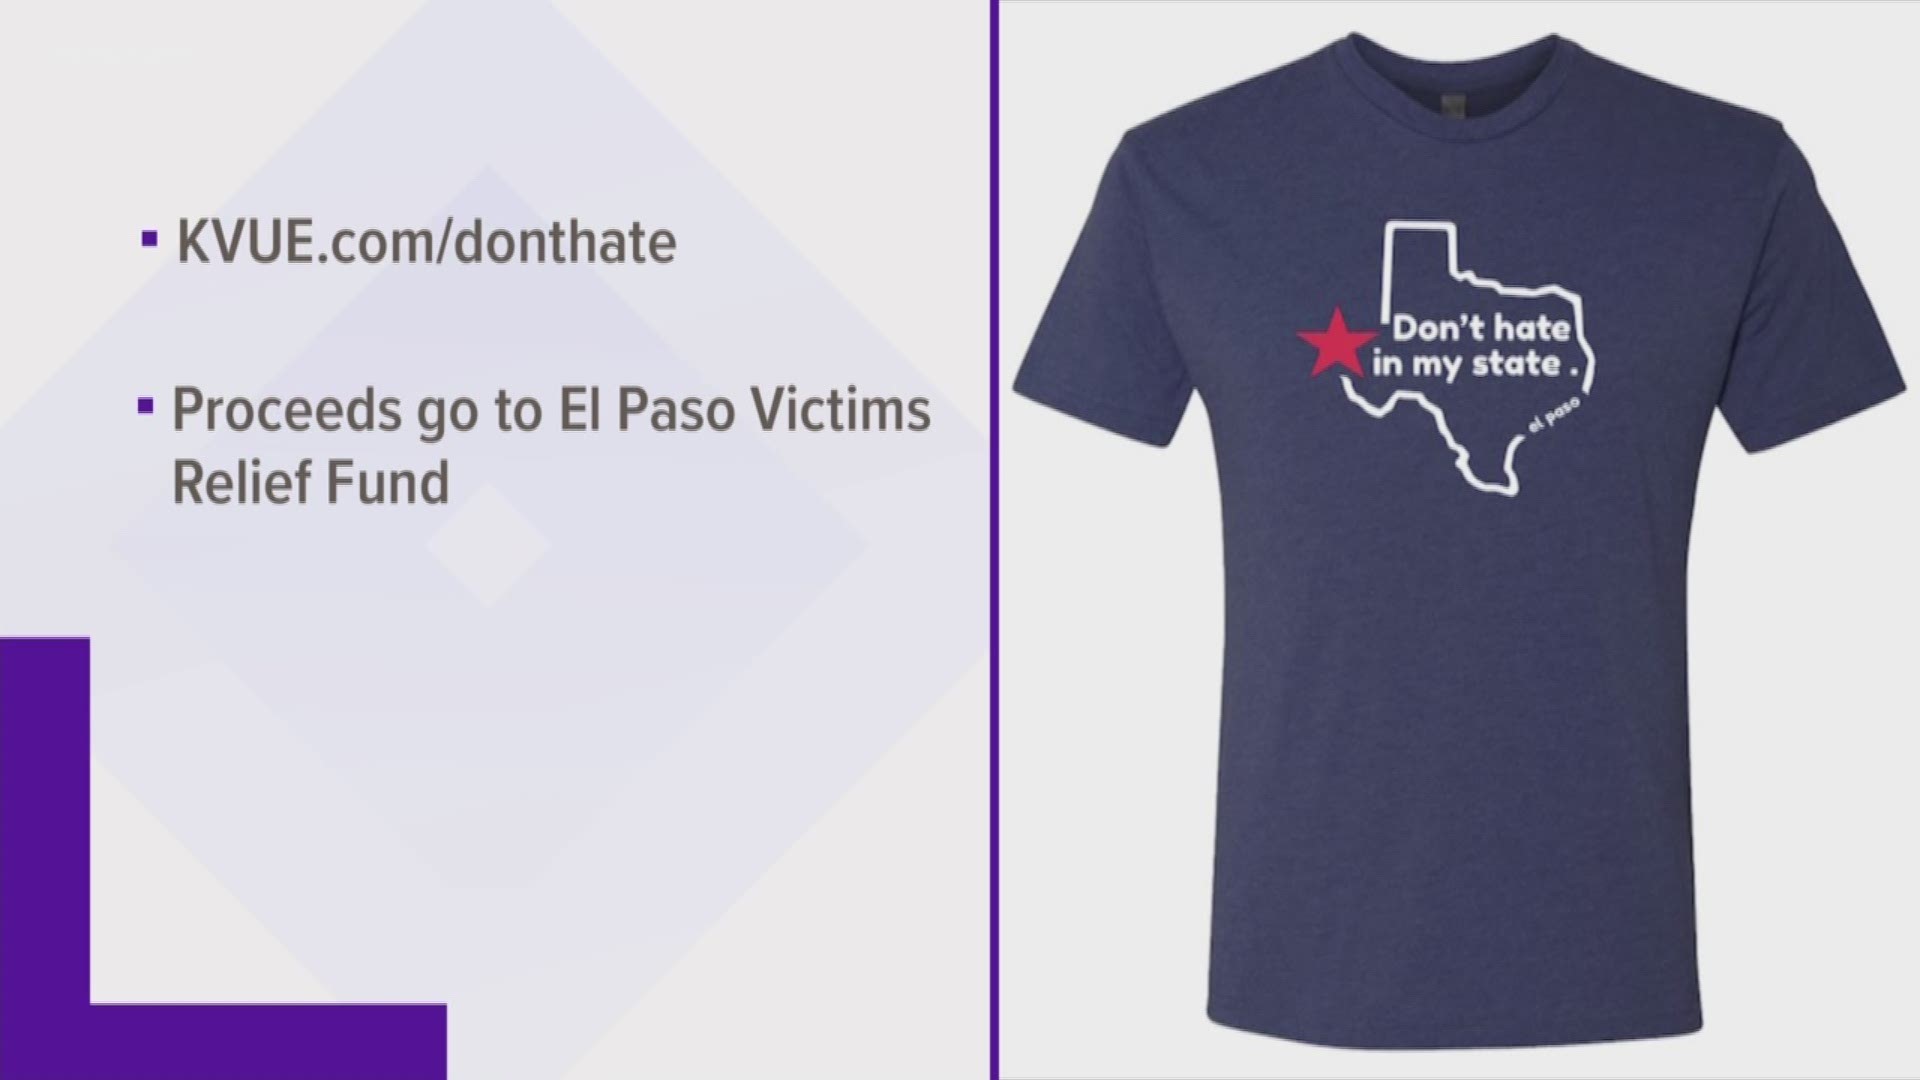 KVUE and other TEGNA stations are showing support for the victims of the El Paso shooting with a new T-shirt.